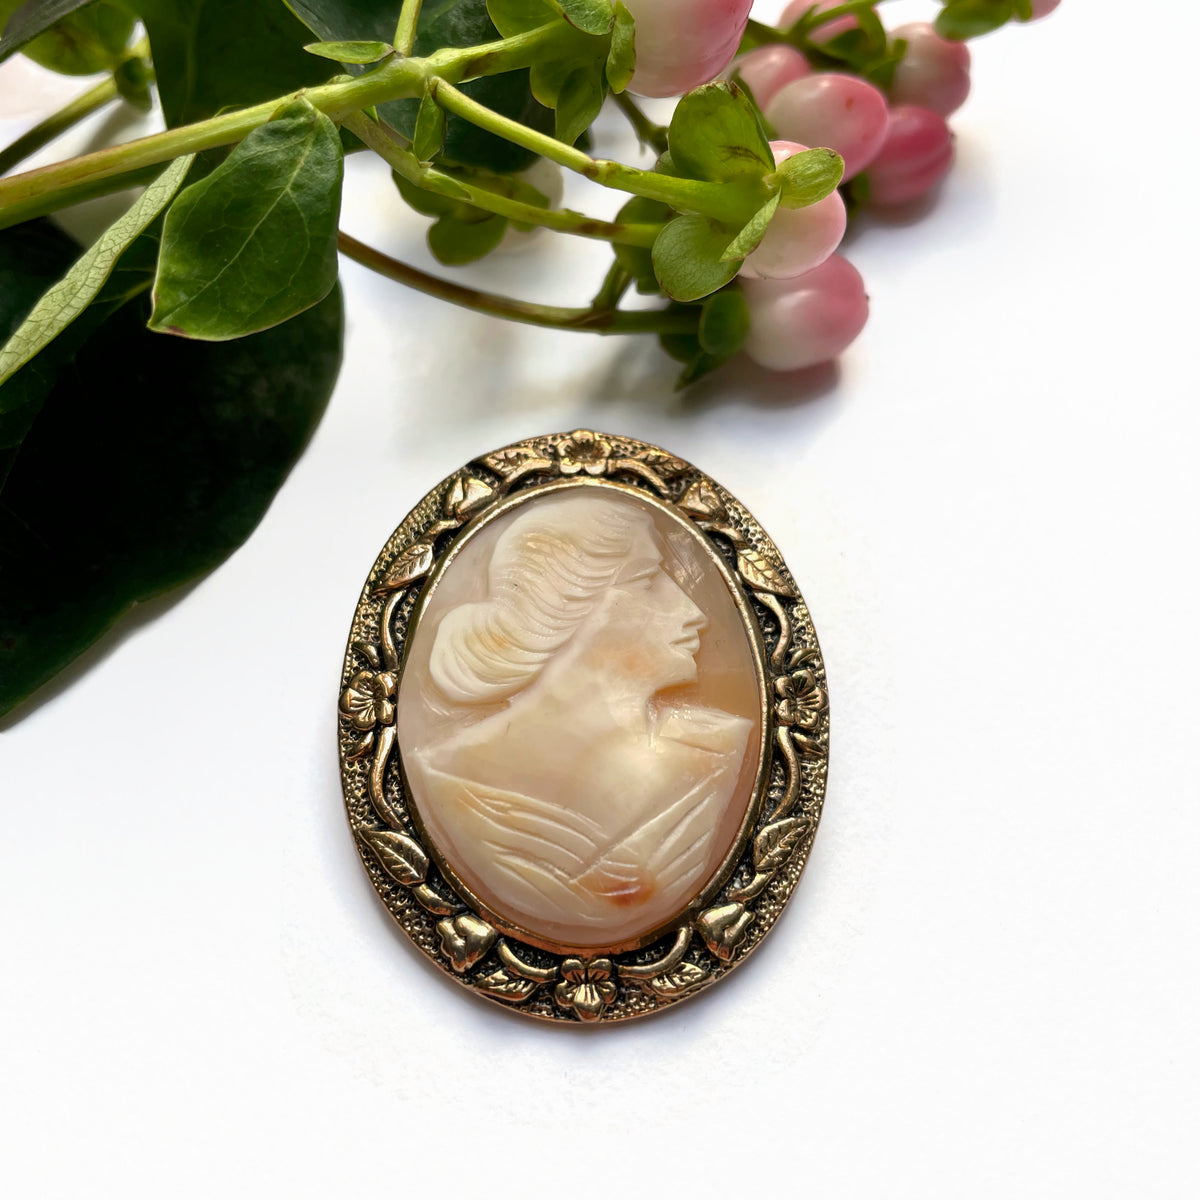 1960's Carved Shell Cameo Brooch or Pendant of a Woman in Profile